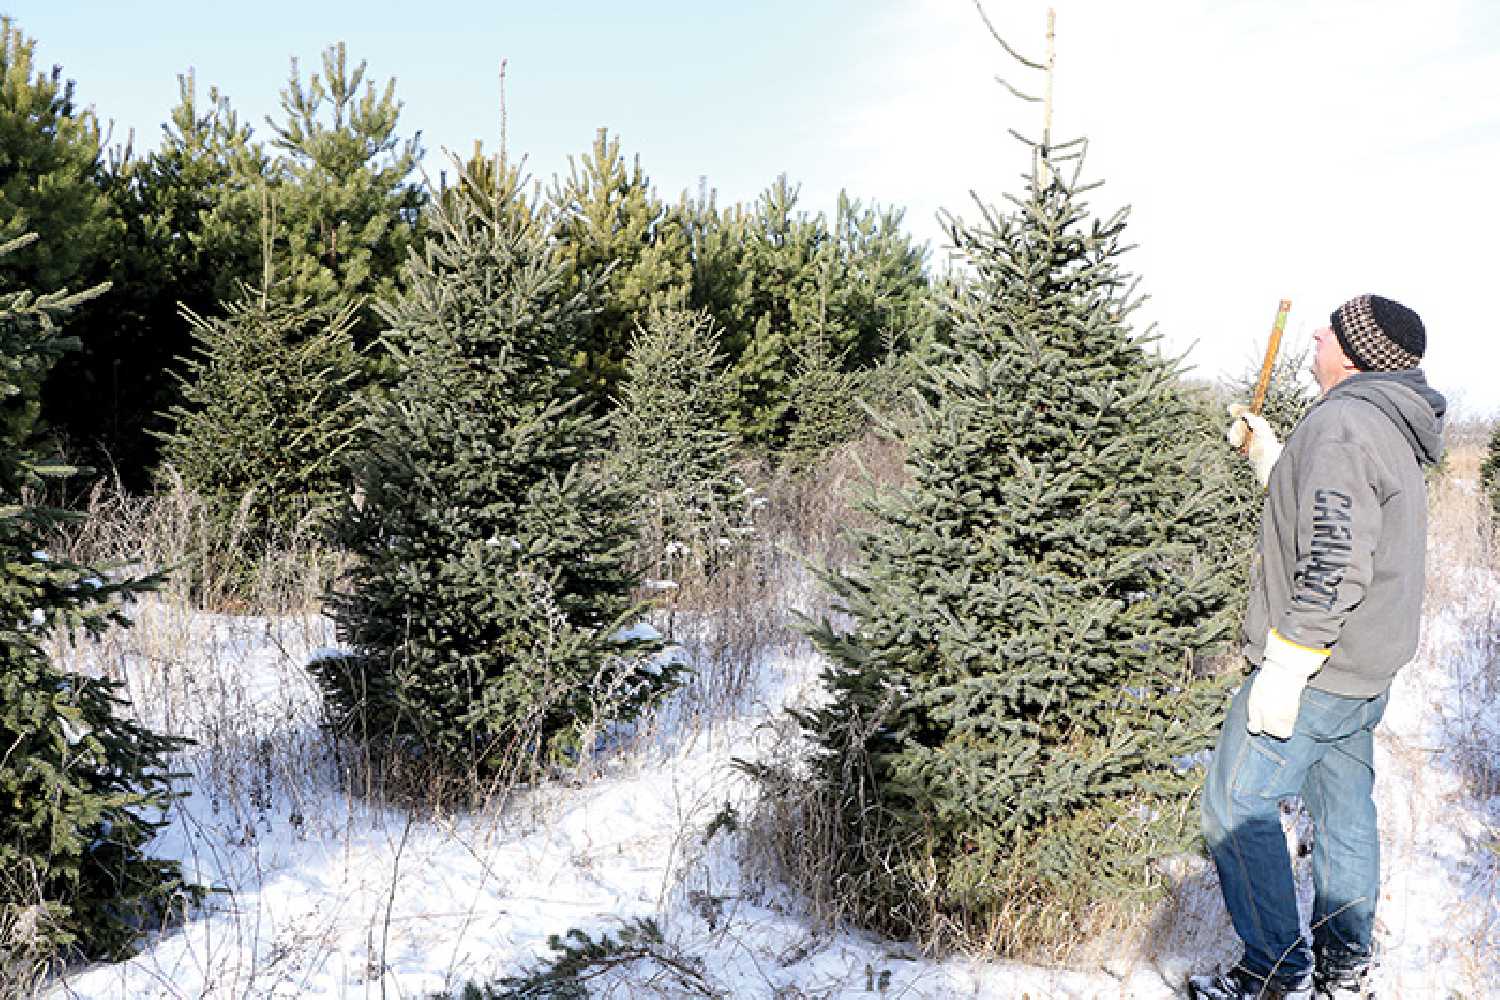 Aaron Hack says his favorite part about working on a Christmas tree farm is helping families find their perfect Christmas tree during the holidays.